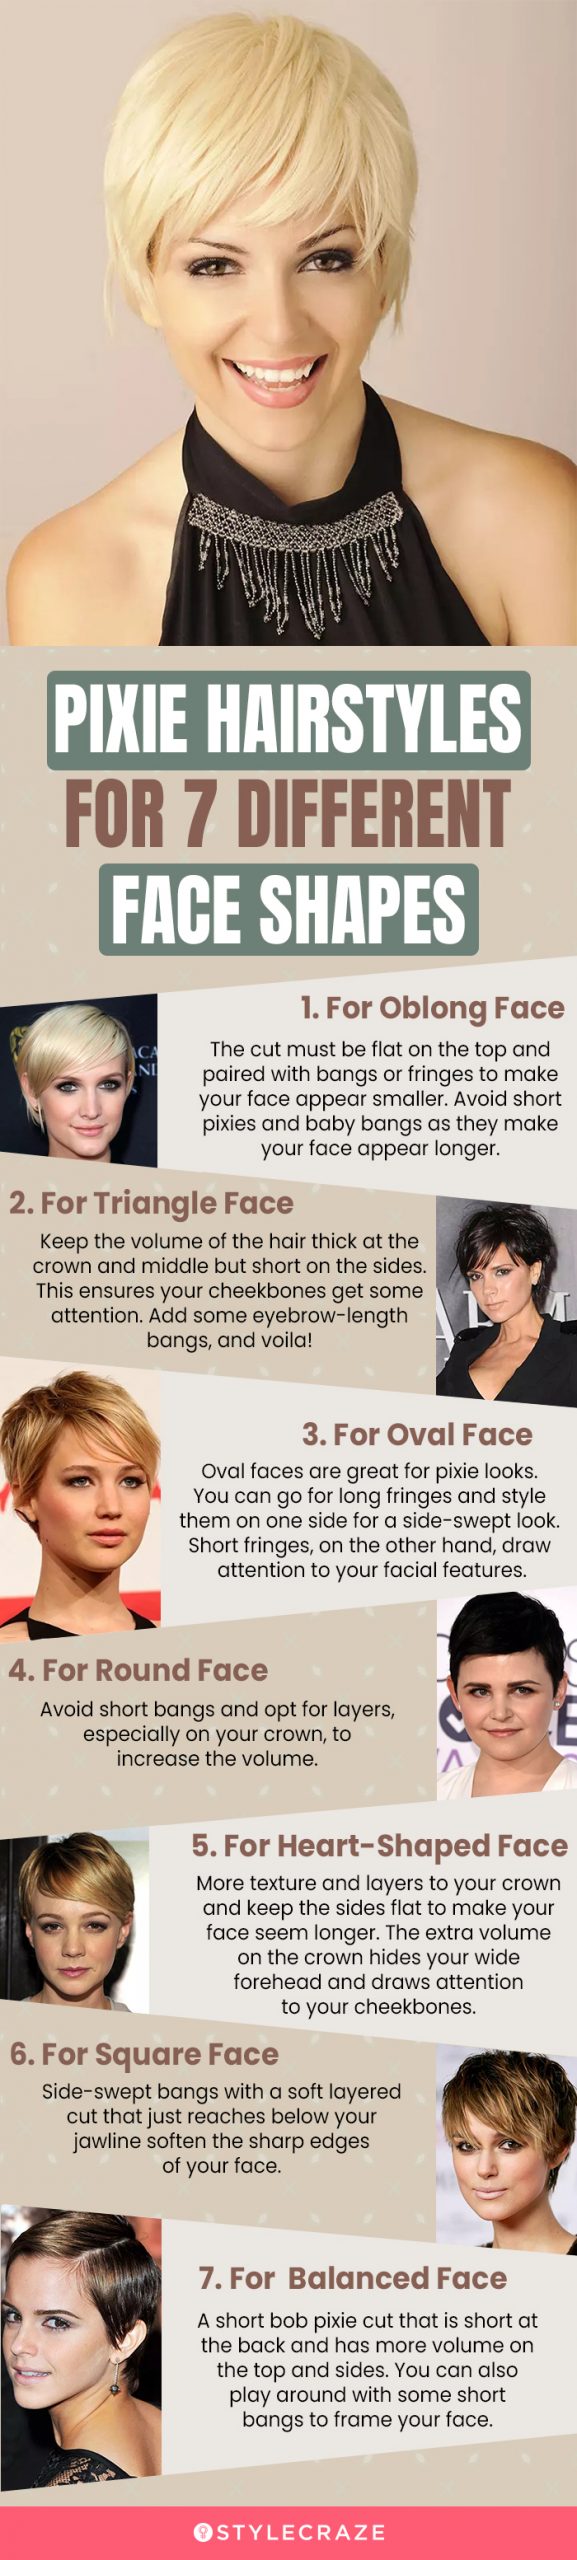 36 Cute and Stylish Pixie Hairstyles for Thin Hair